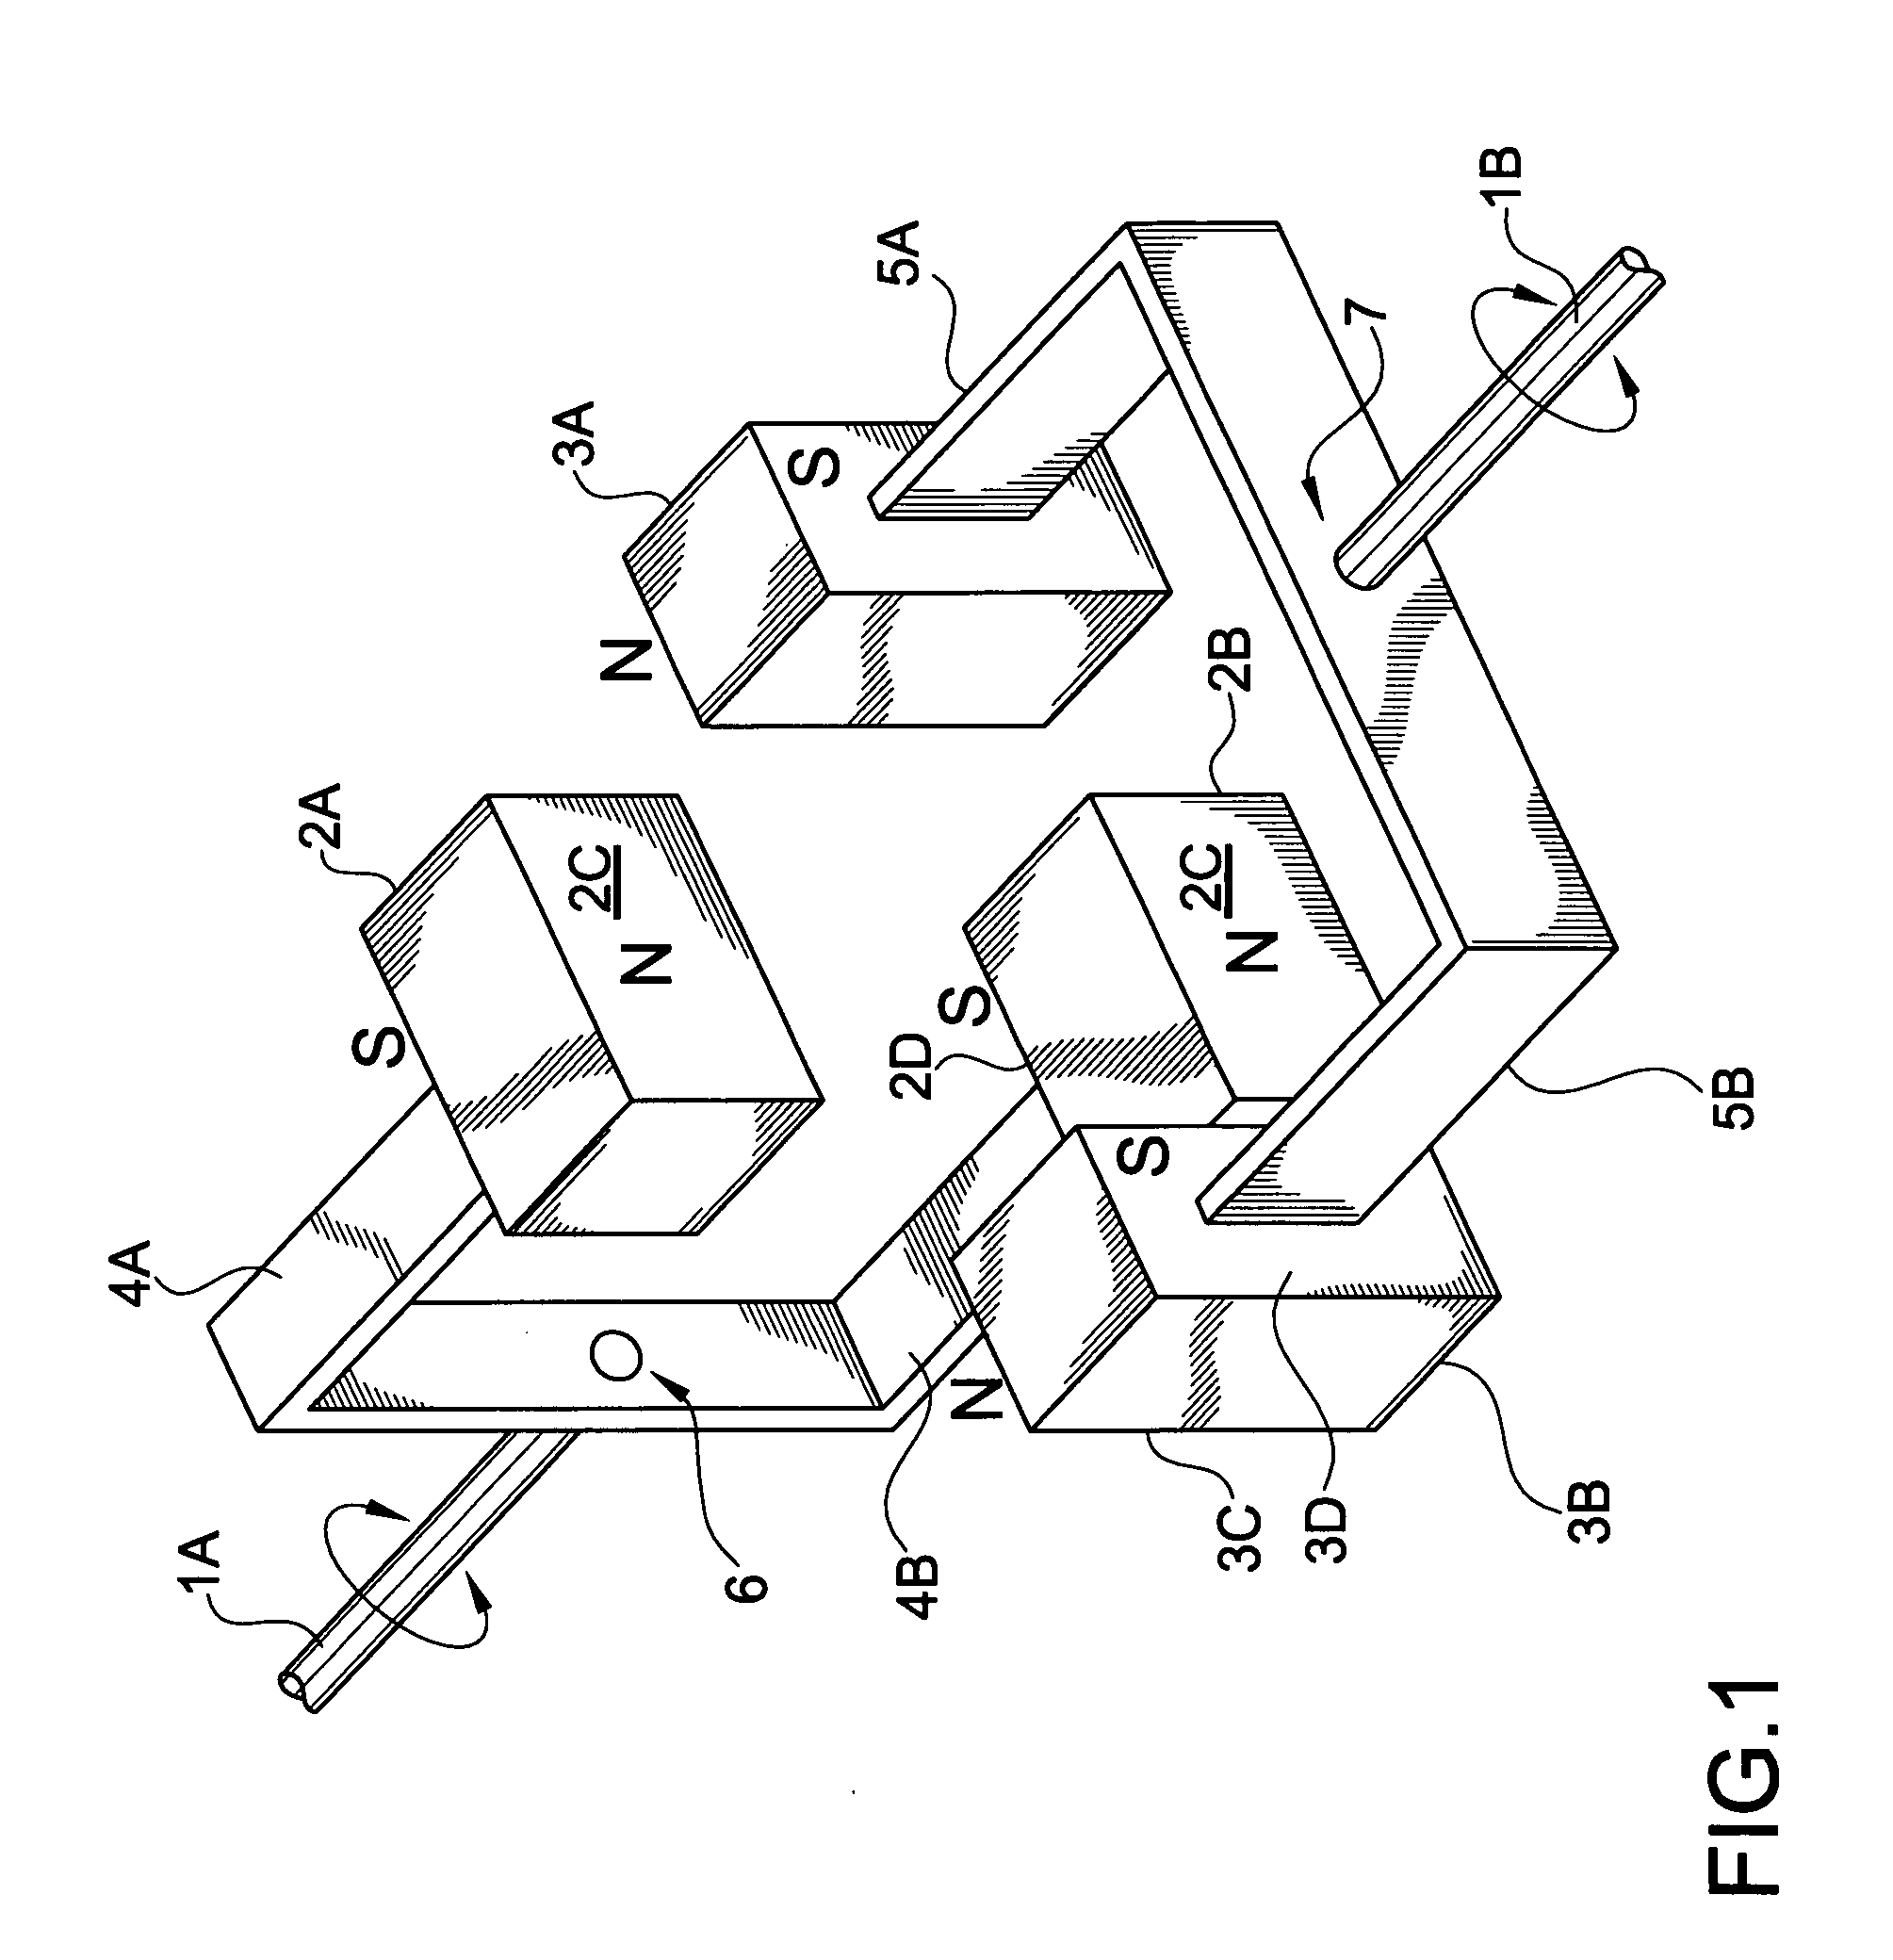 Torque transfer system and method of using the same